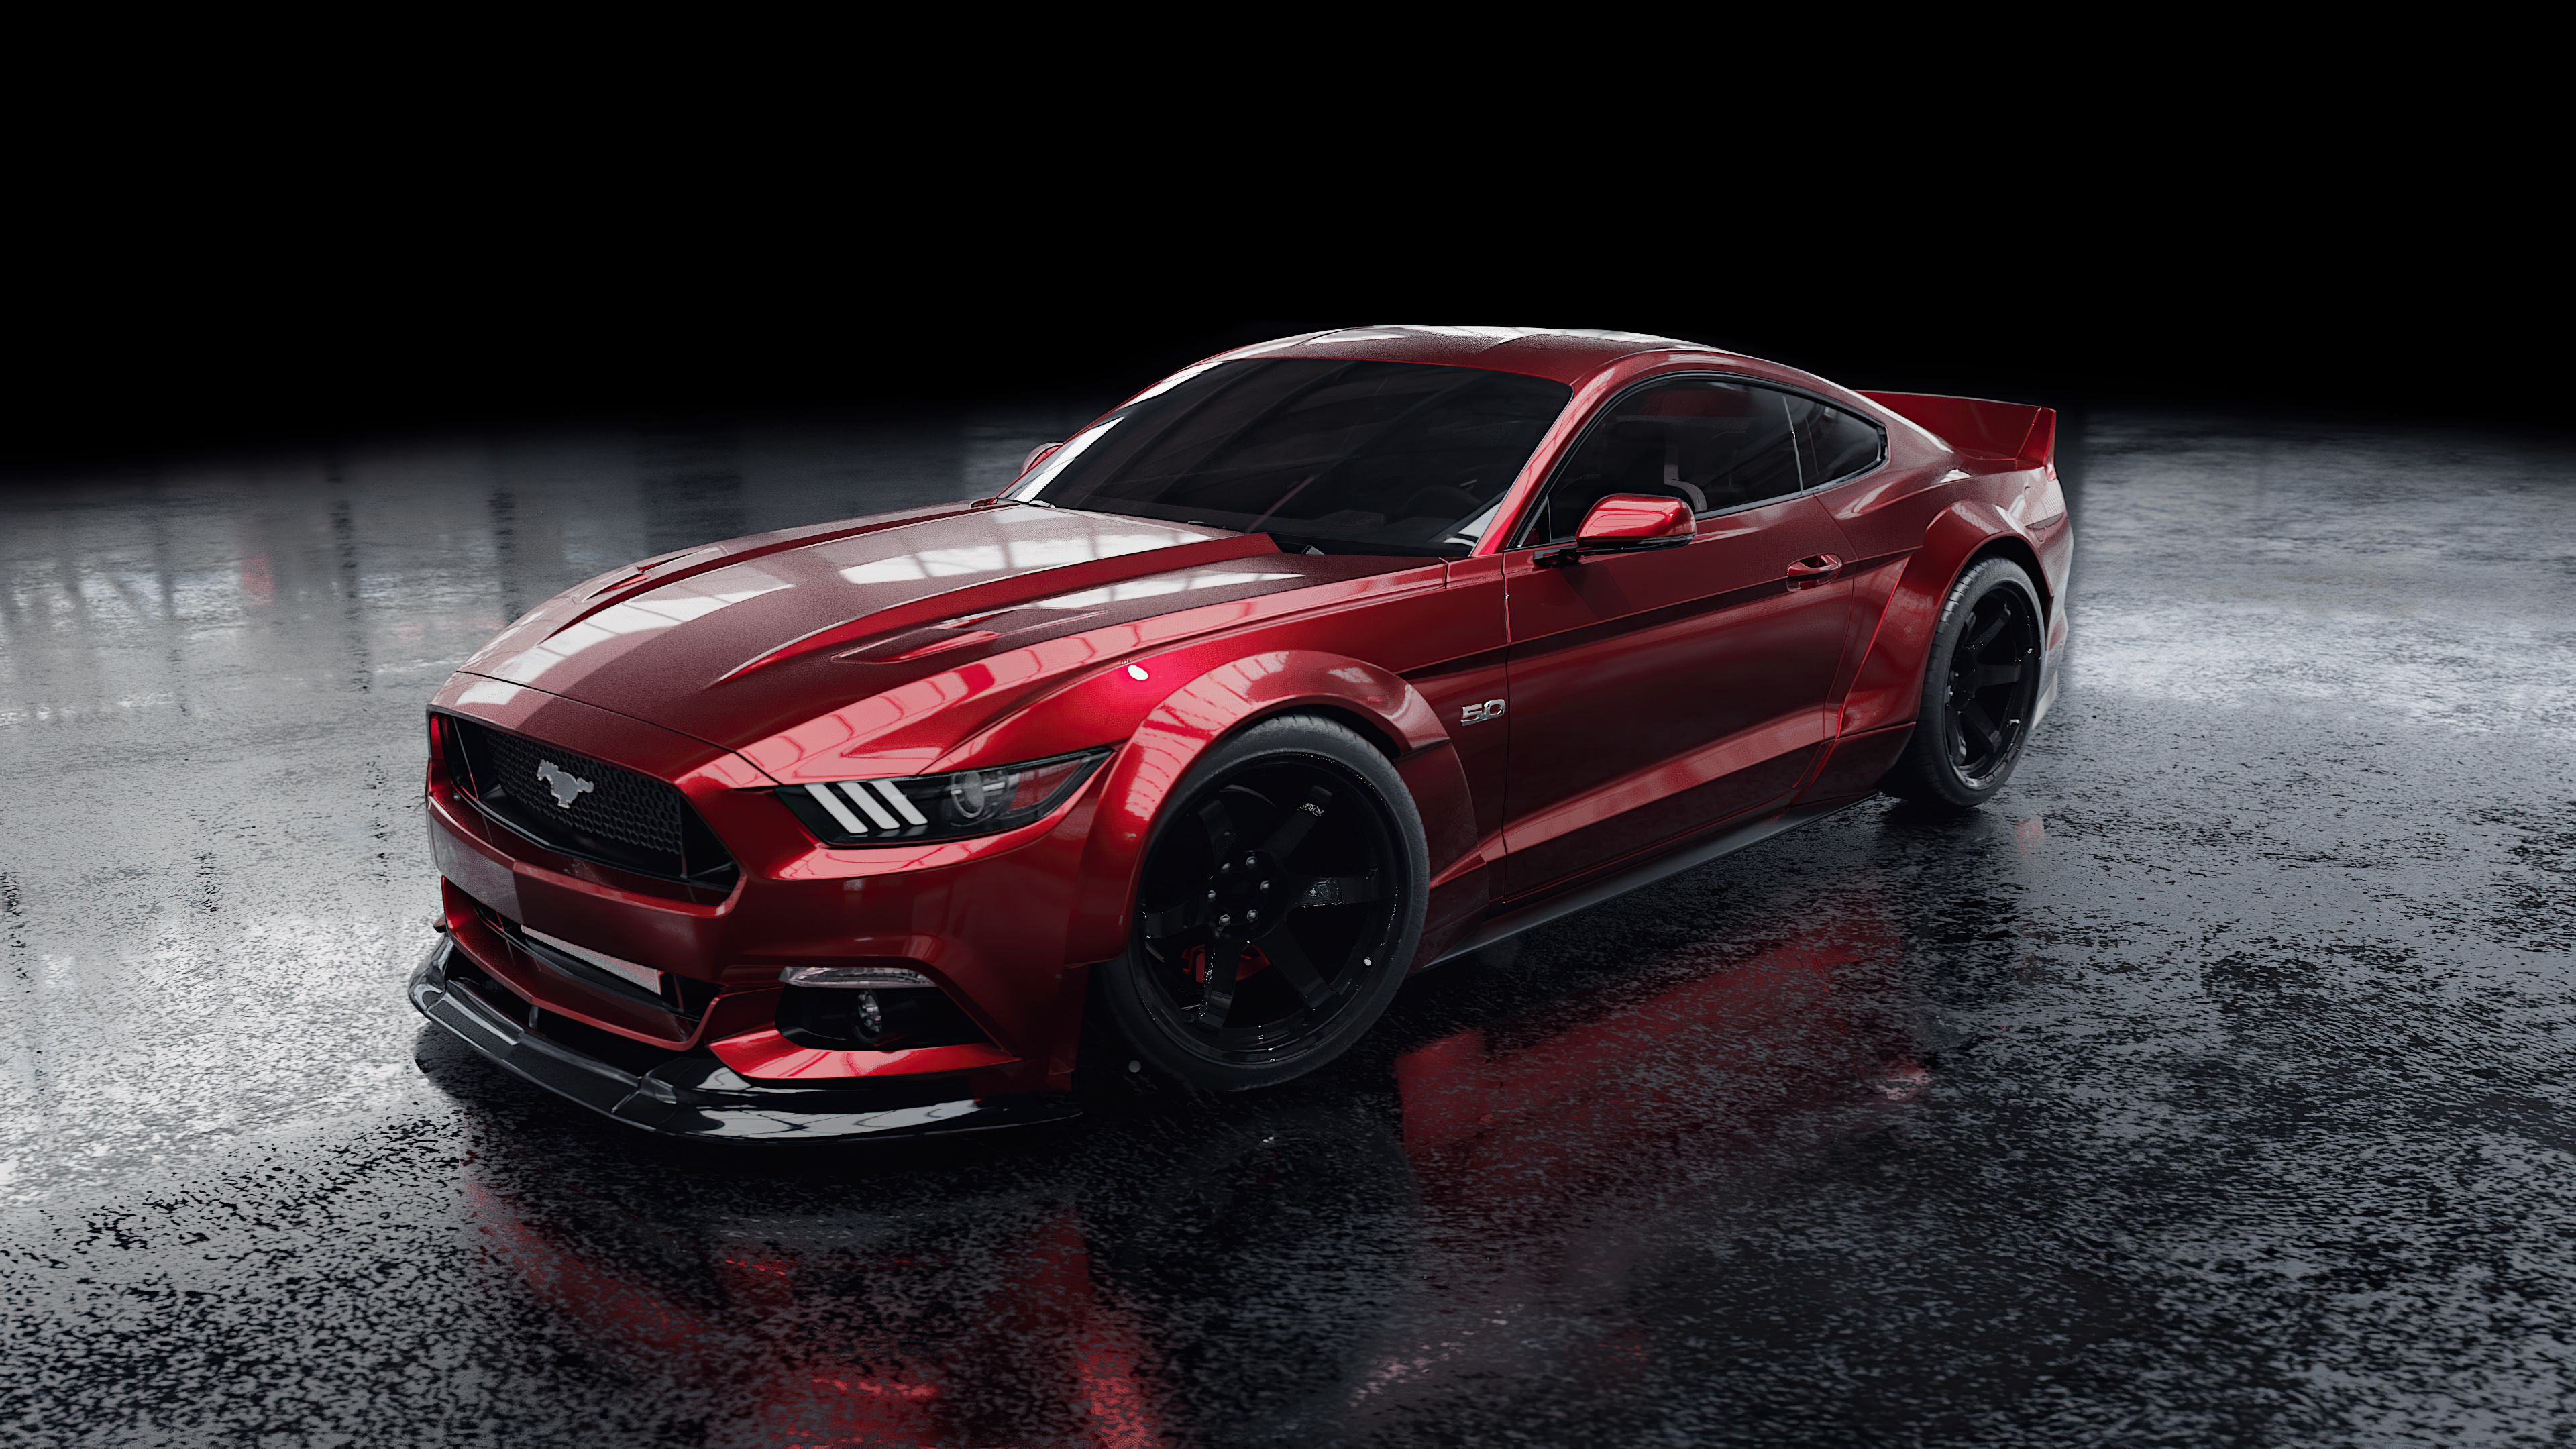 3840x2160 Red Ford Mustang 4k Red Ford Mustang 4k wallpapers | Ford mustang, Mustang, Mustang wallpaper